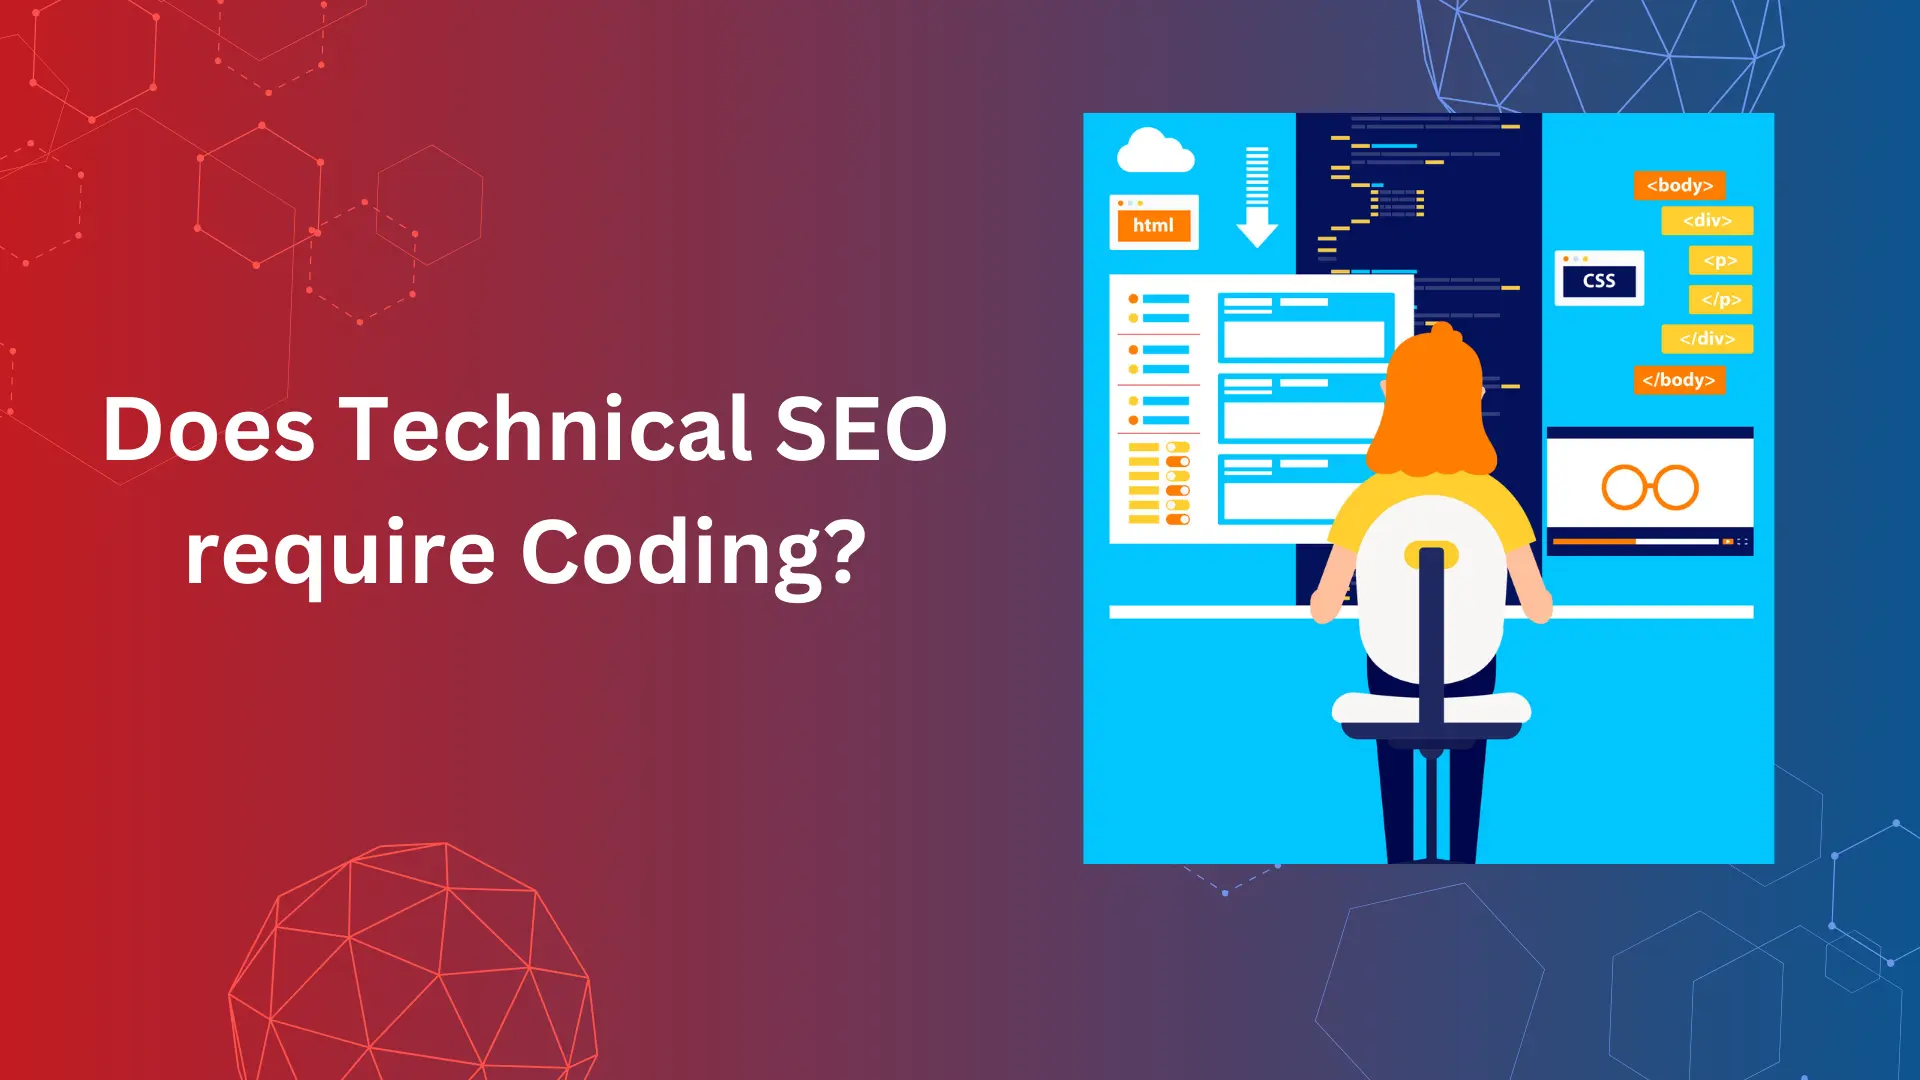 Does Technical SEO require Coding